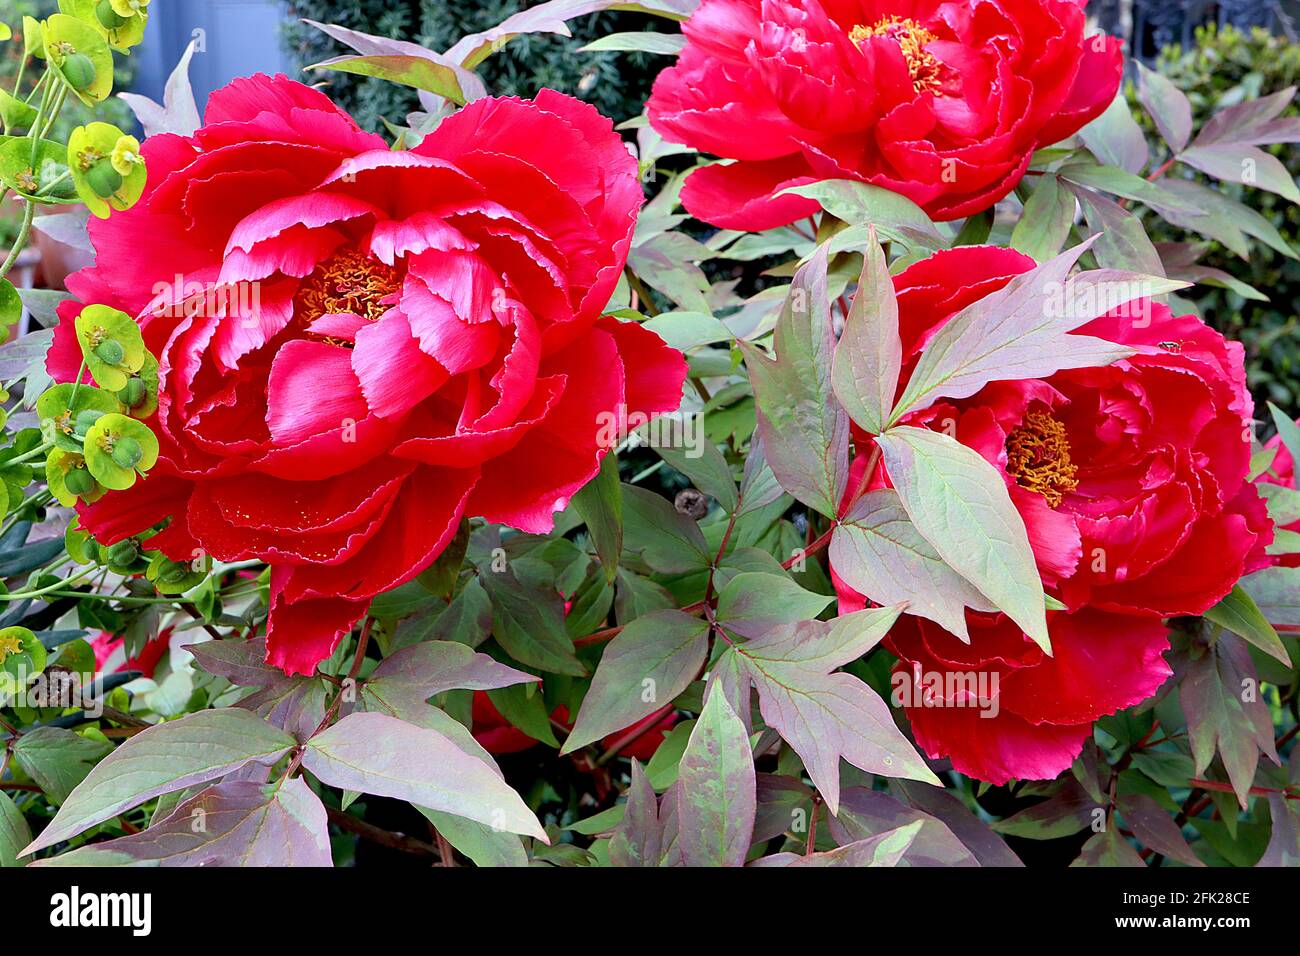 Paeonia x suffruticosa ‘Red’ tree peony Red – deep red flowers with inner petals tinged pink,  April, England, UK Stock Photo